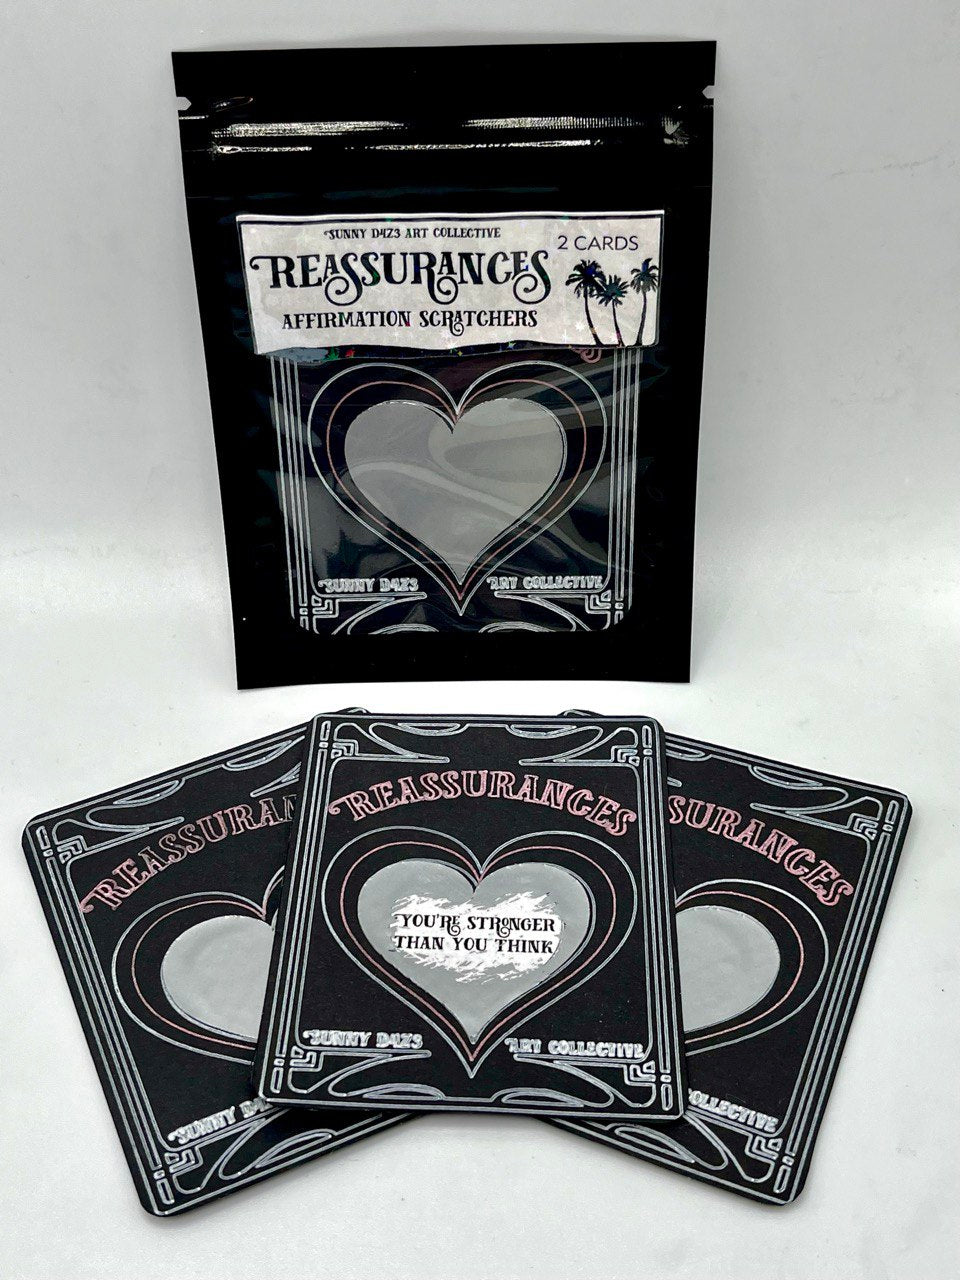 reassurances scratch off cards, three cards and packaging